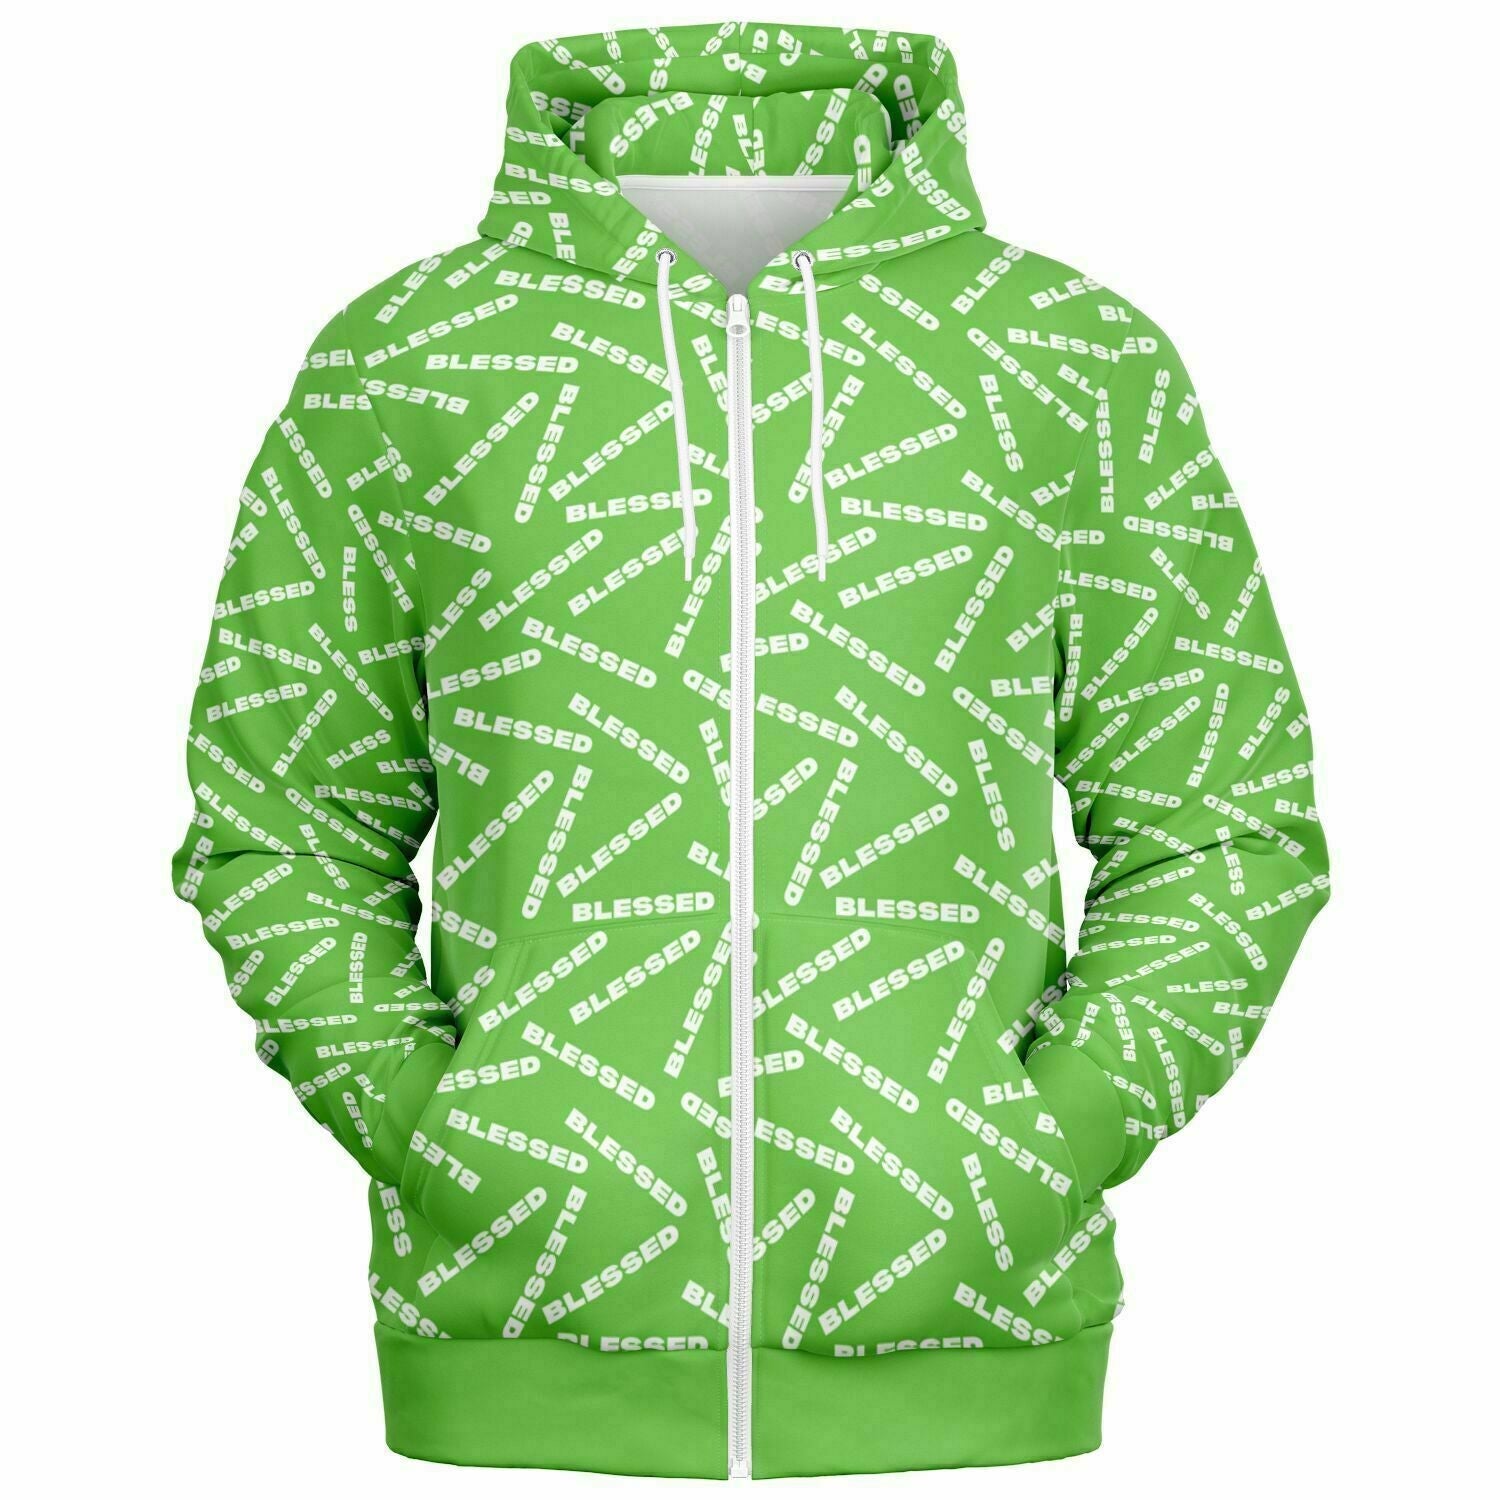 BLESSED Green Fashion Zip-Up Hoodie Get Blessed Now